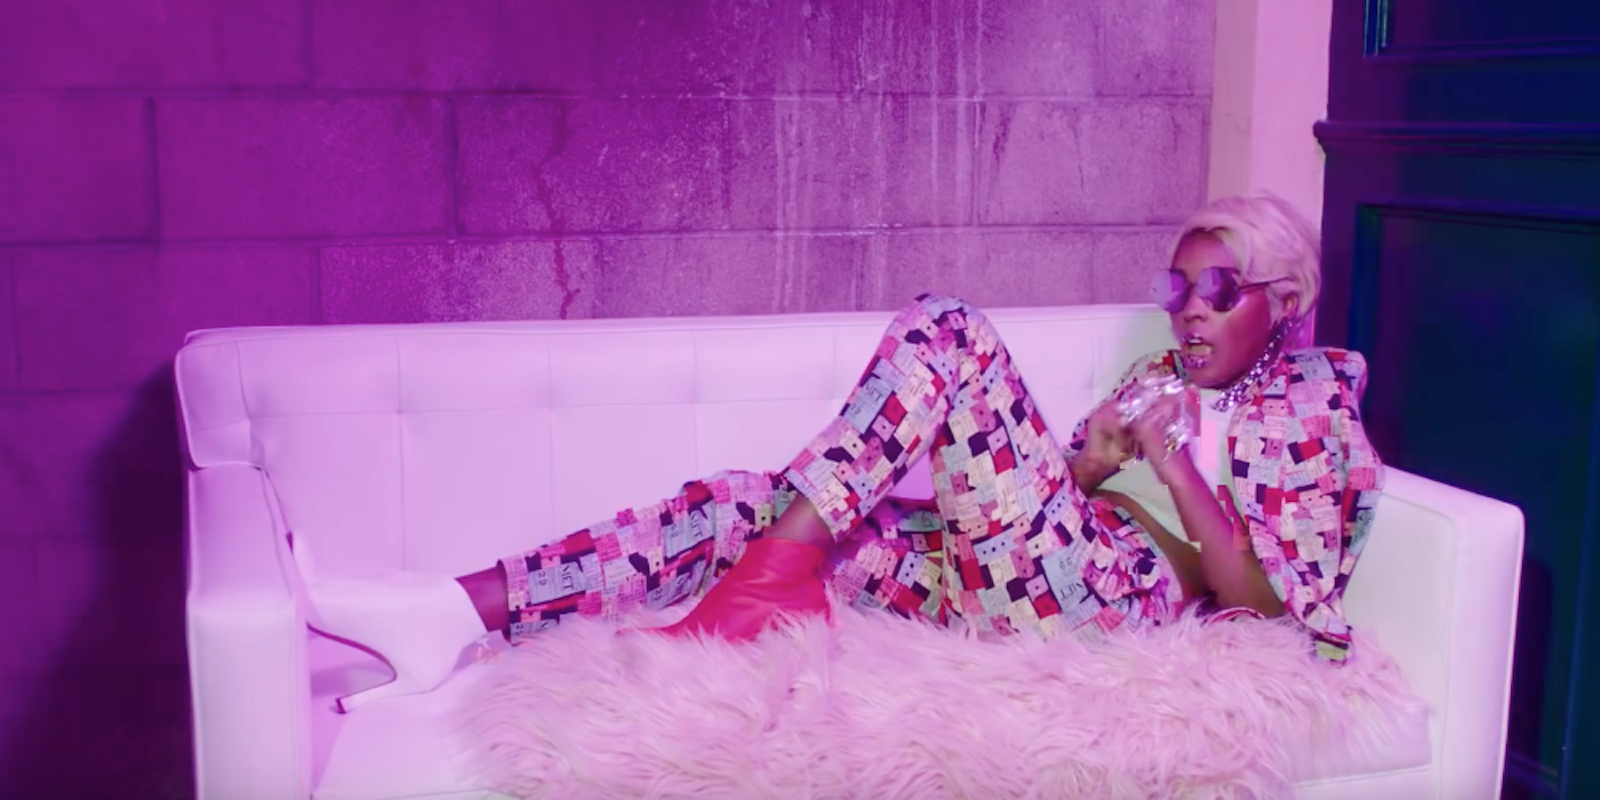 Janelle Monae's 'Make Me Feel' video features bisexual lighting.